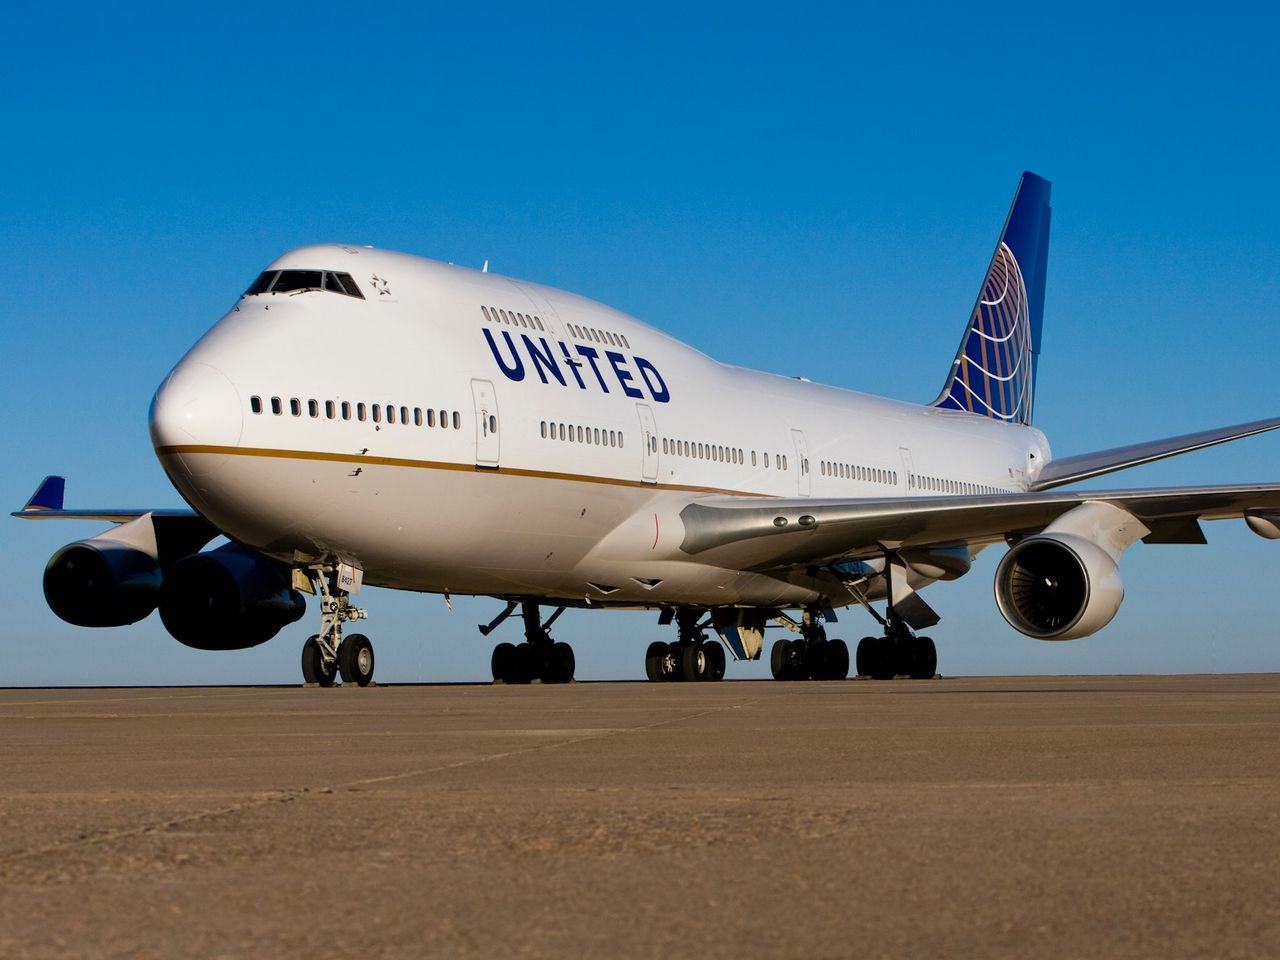 united-airlines-ceo-explains-why-the-boeing-747-jumbo-jet-will-soon-go-away